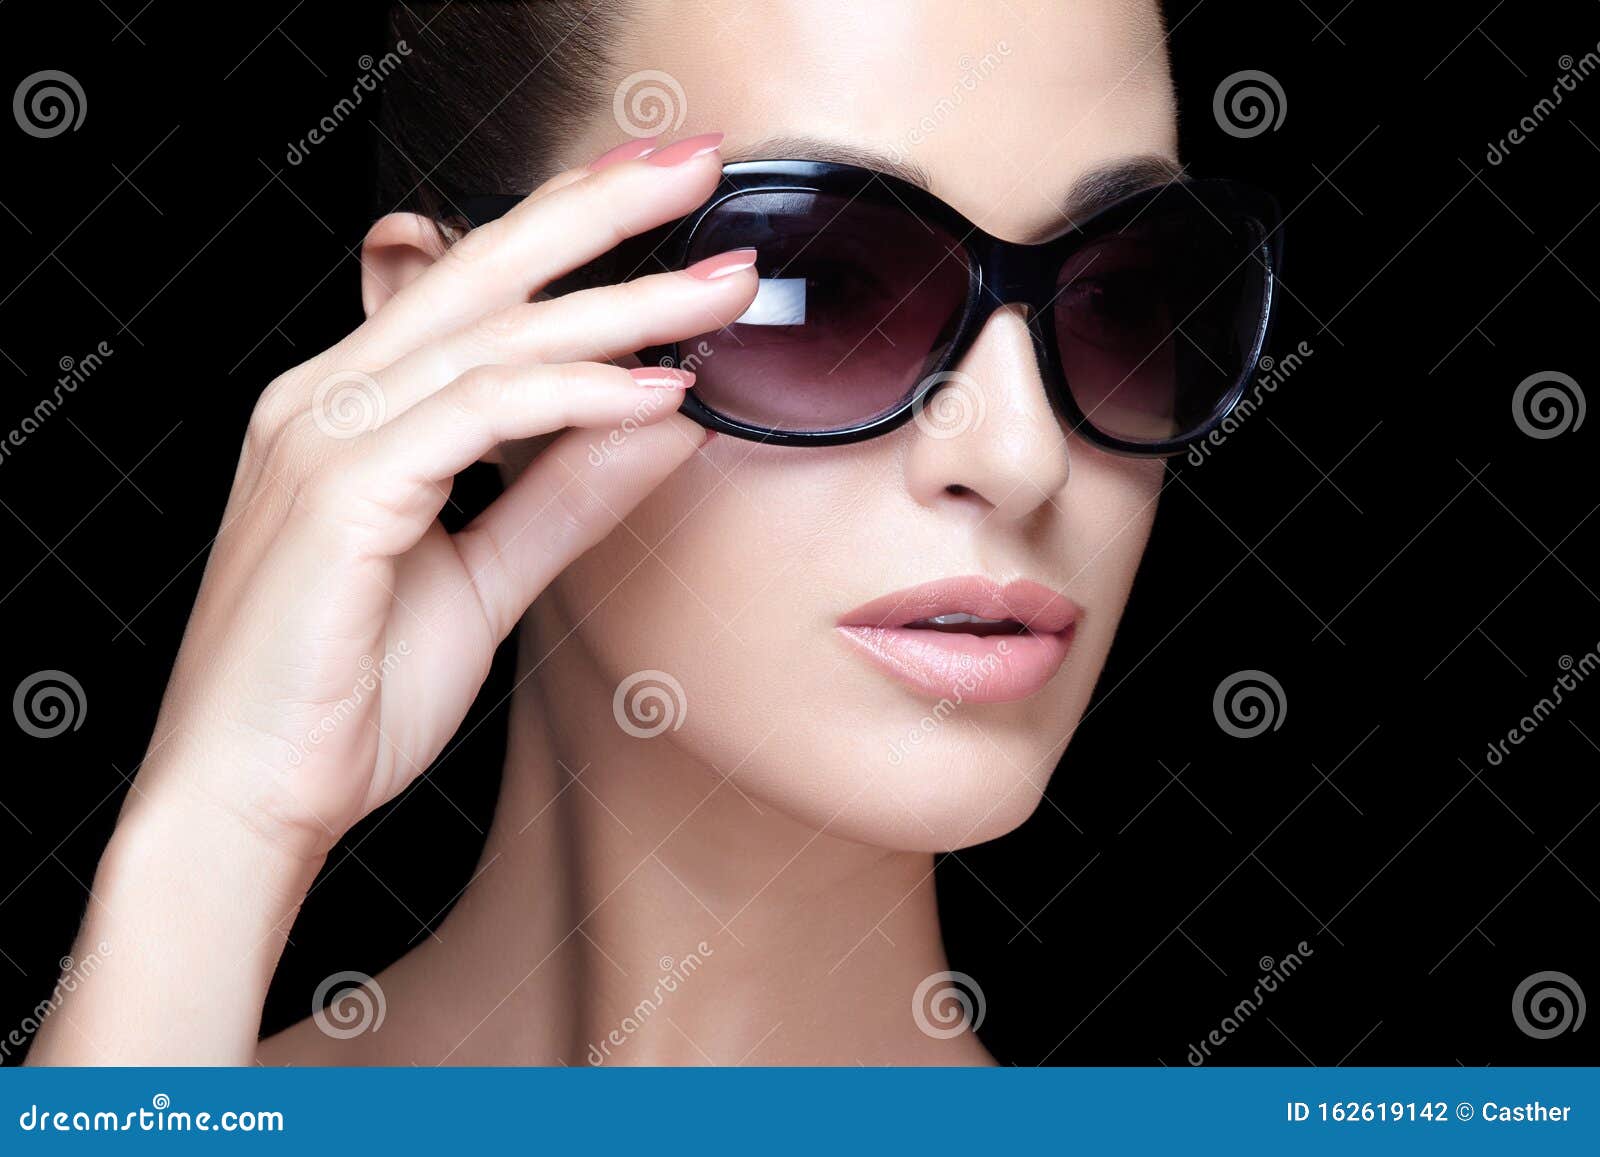 Fashion Model Girl with Nude Makeup and Big Sunglasses. Close Up Beauty ...